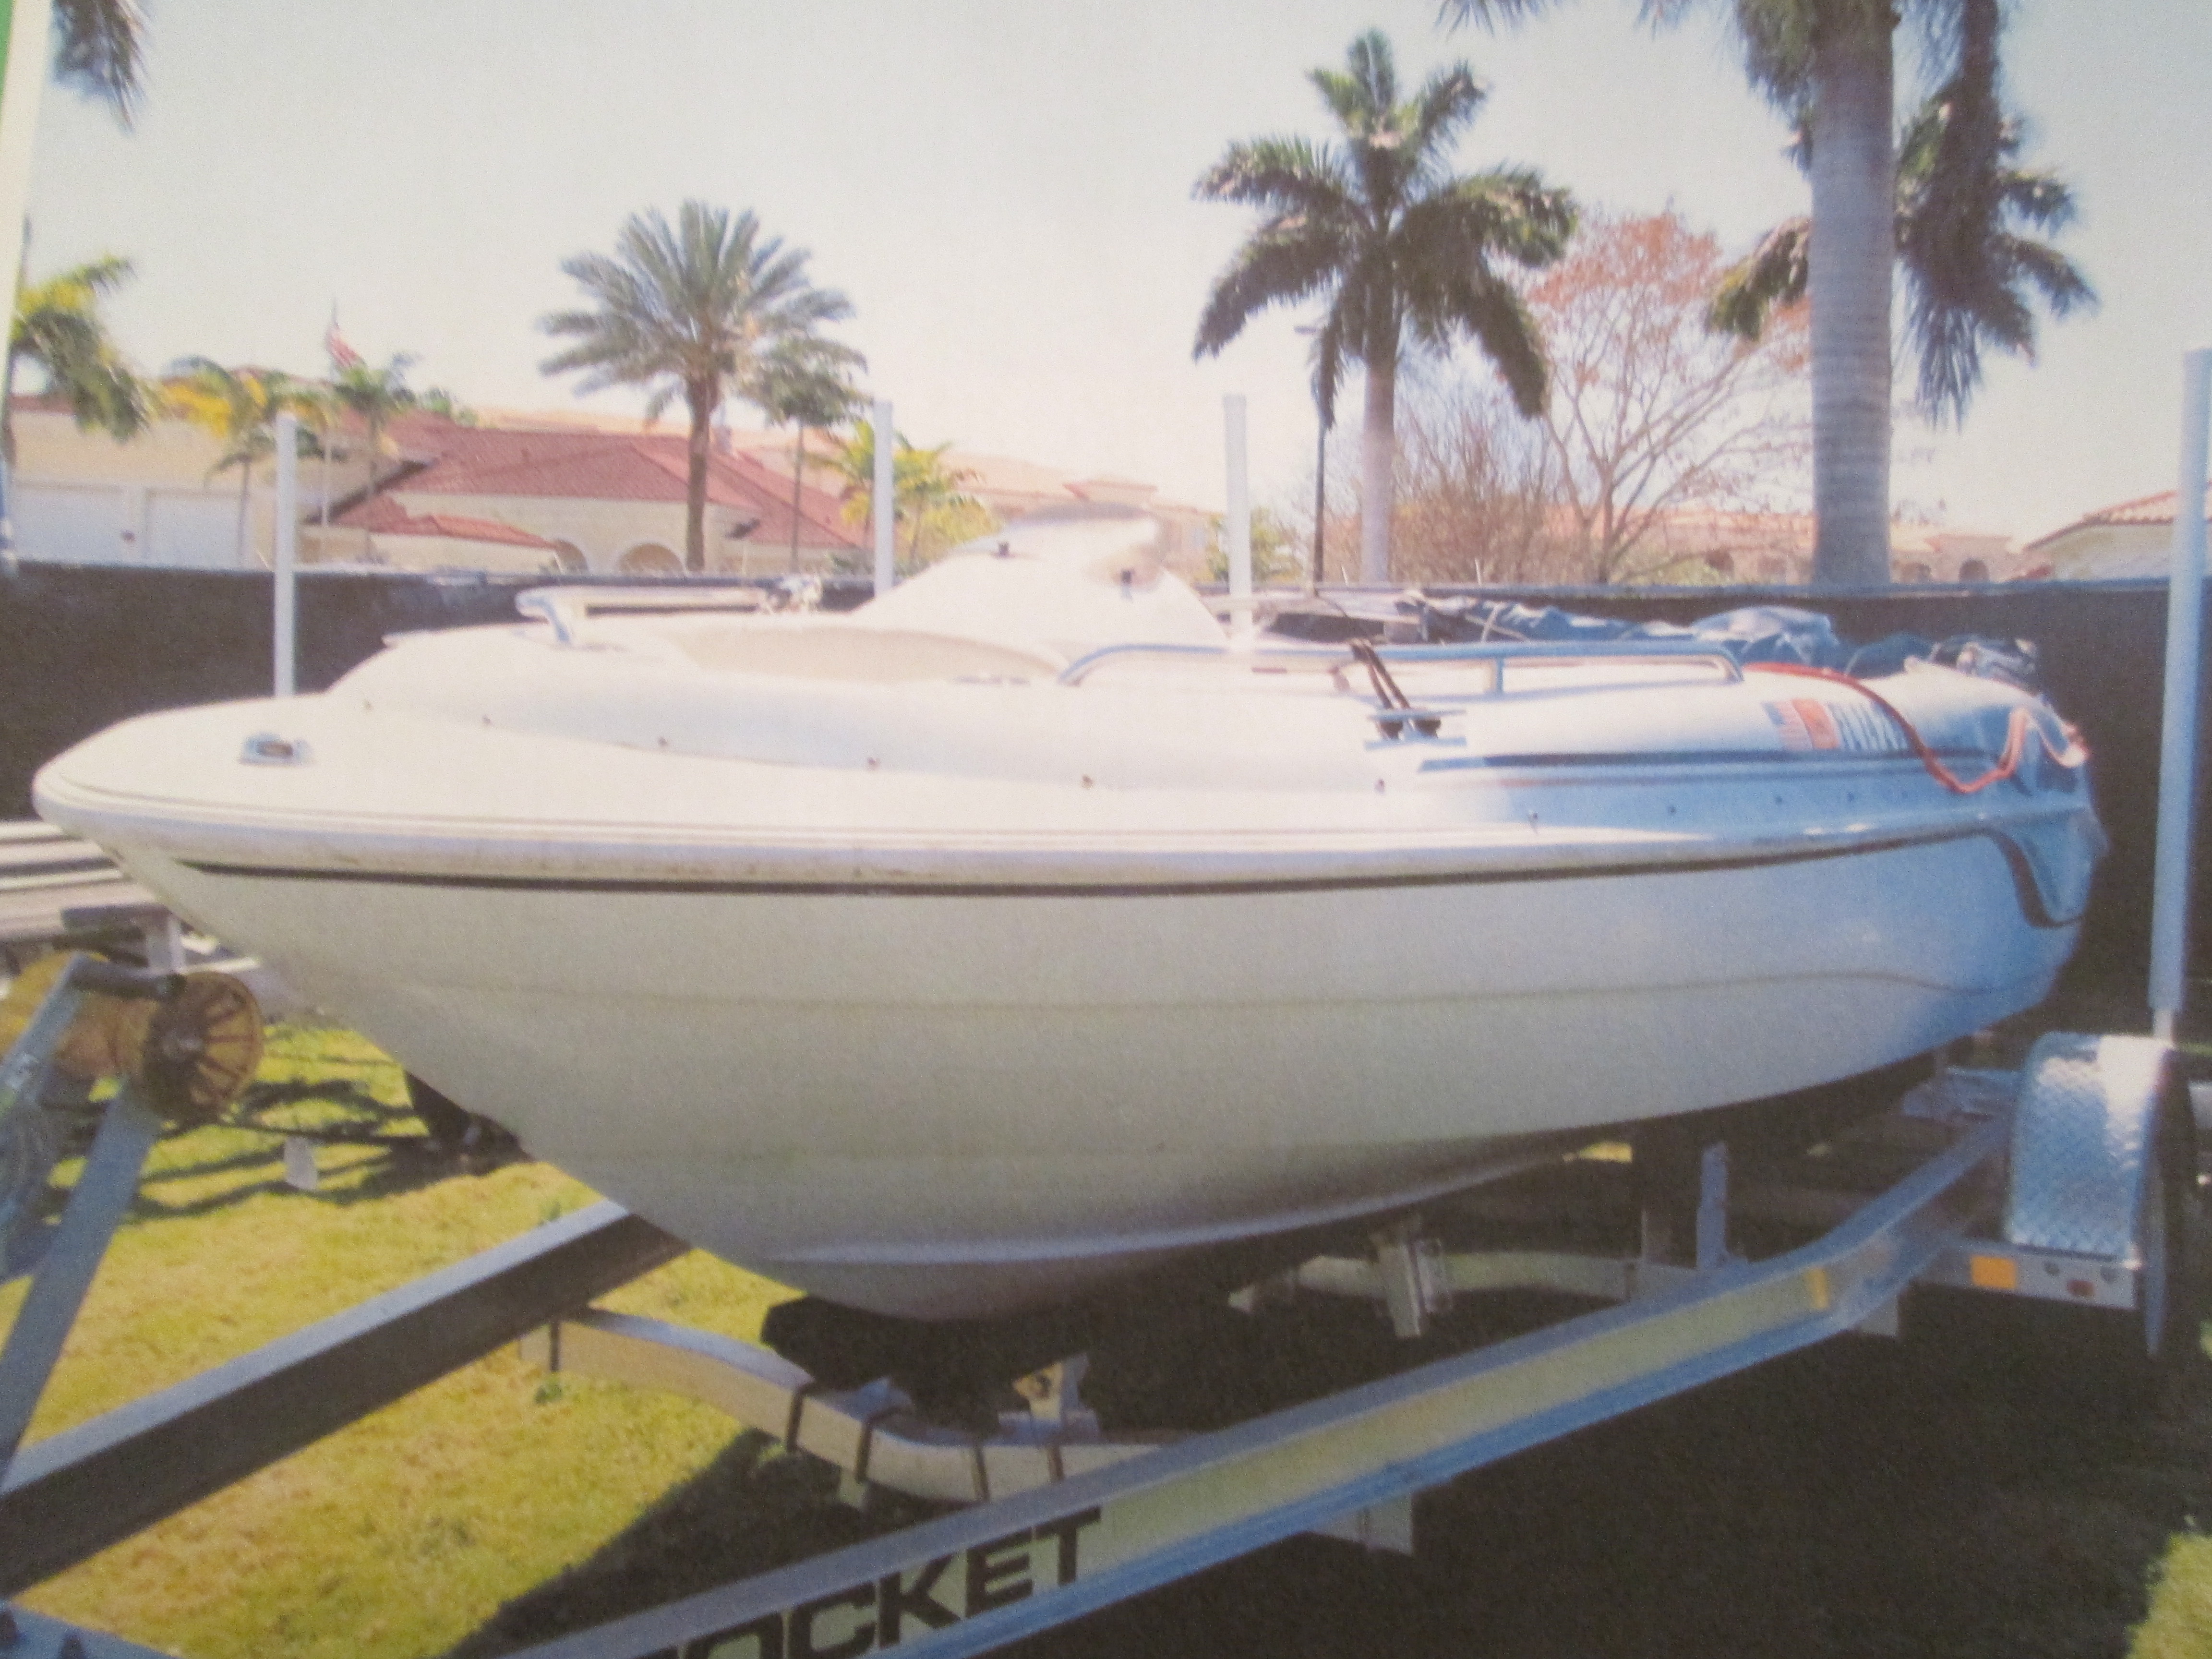 2000 Godfrey Hurricane FD GS 170 Power boat for sale in Hutchinson Is, FL - image 1 